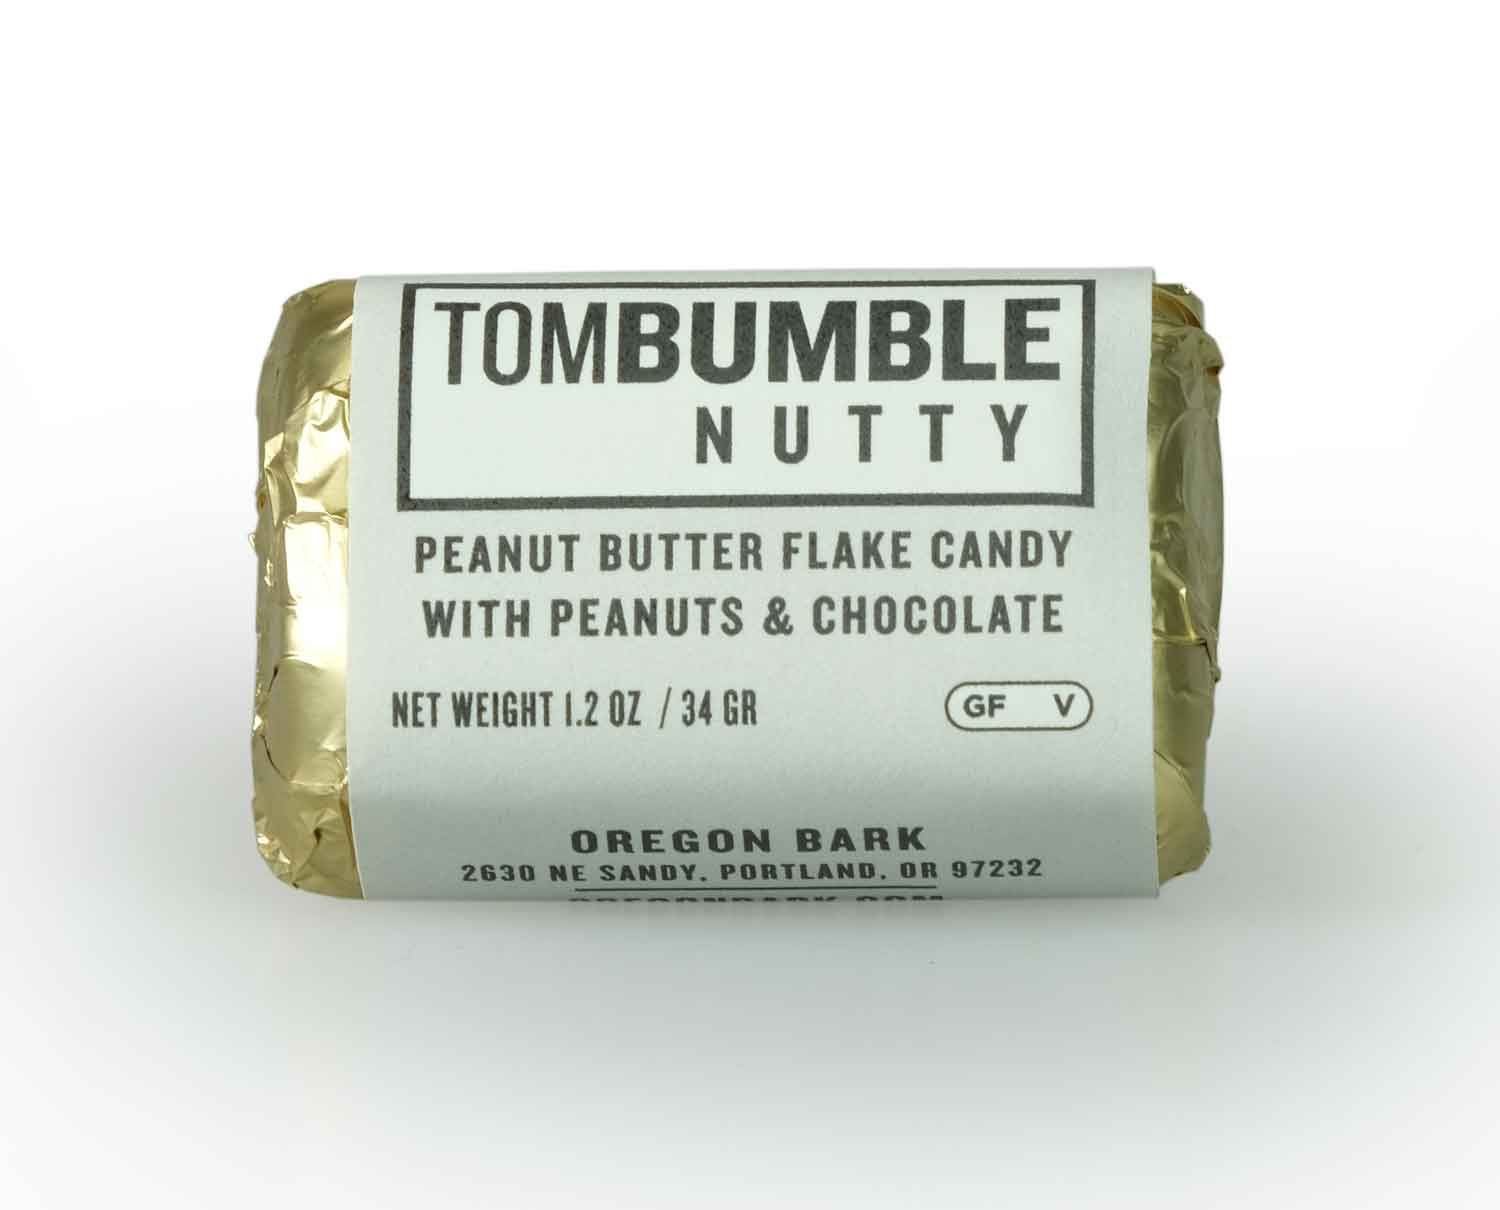 Popular Brands Tagged Peanut Butter - All City Candy